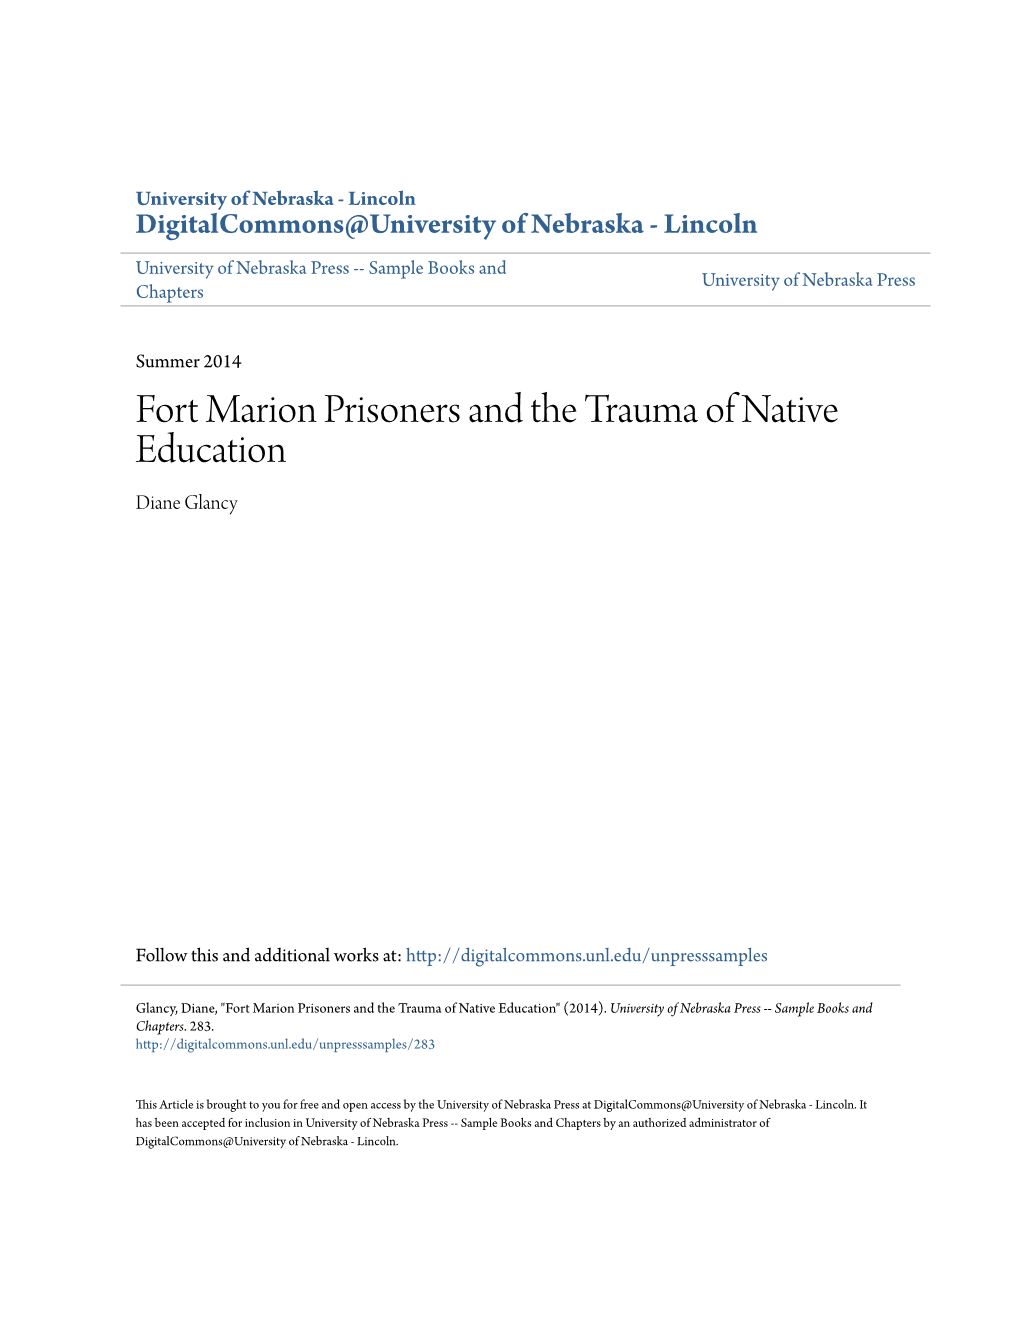 Fort Marion Prisoners and the Trauma of Native Education Diane Glancy